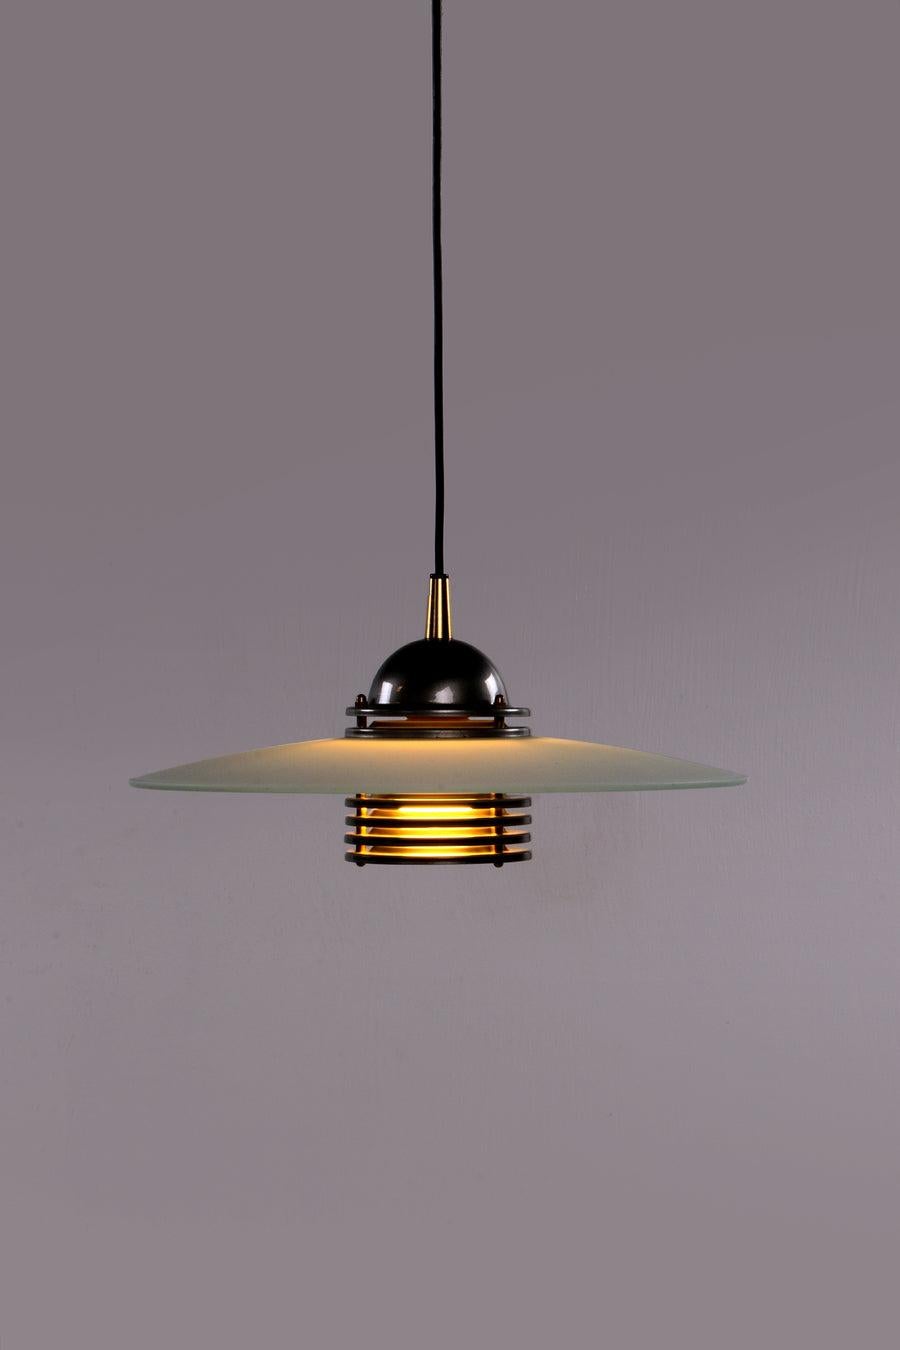 Swedish Design Pendant Lamp by the Brand Belid, 1960

This postmodern pendant was designed by Belid, Sweden.
It has a frosted glass shade, a metal shade, and a beautiful bottom.

Sustainable: environmentally conscious By supplementing your interior